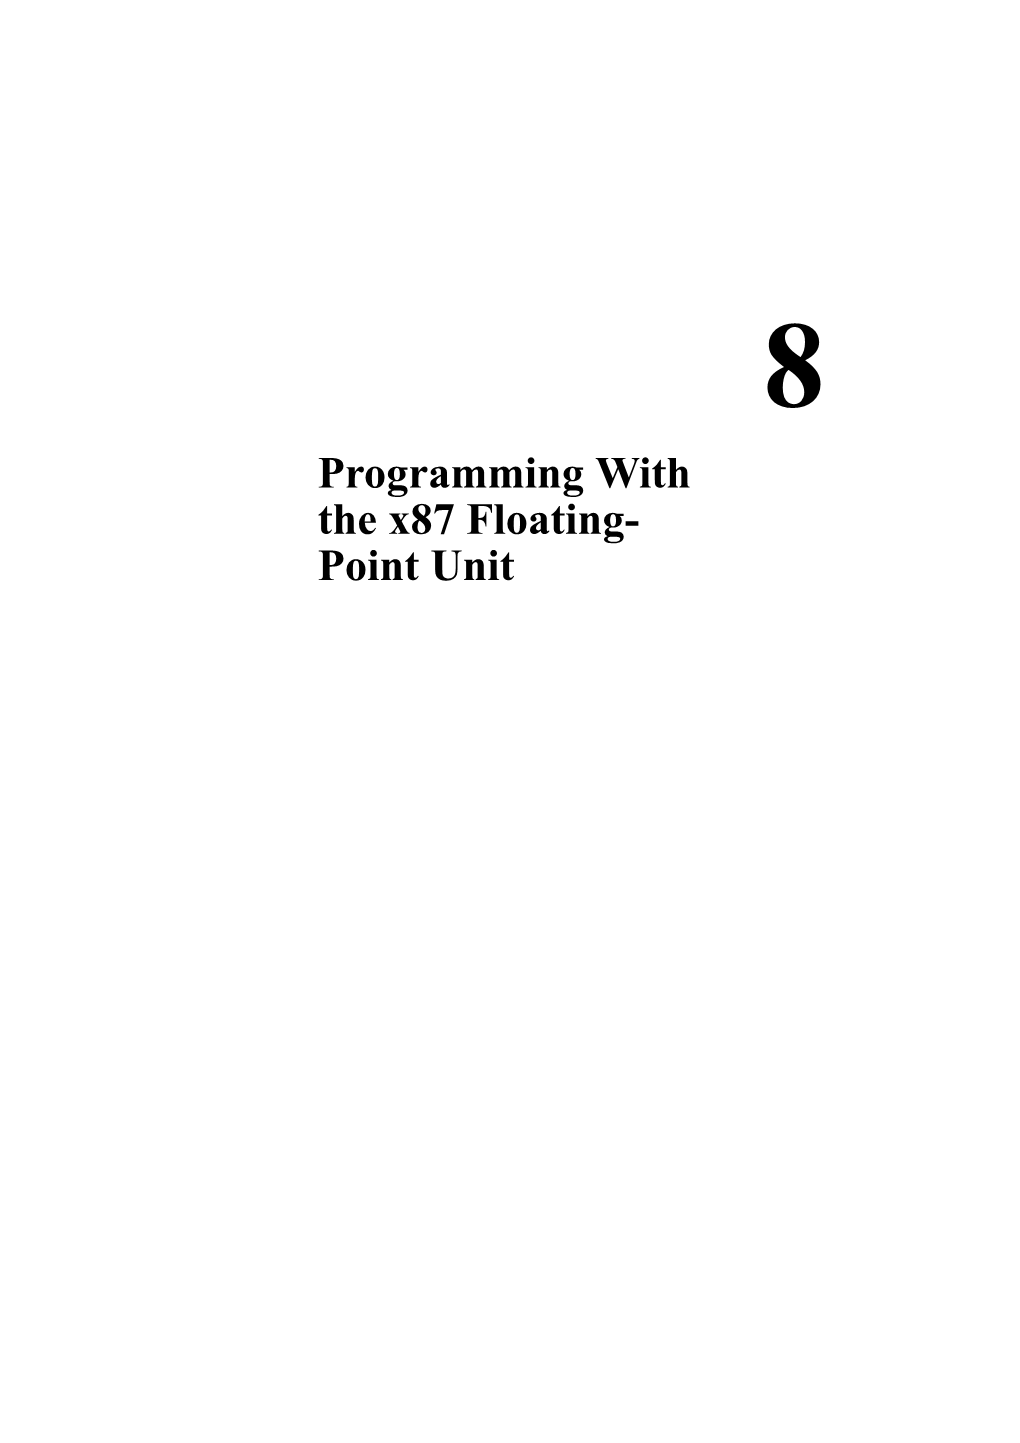 Programming with the X87 Floating- Point Unit